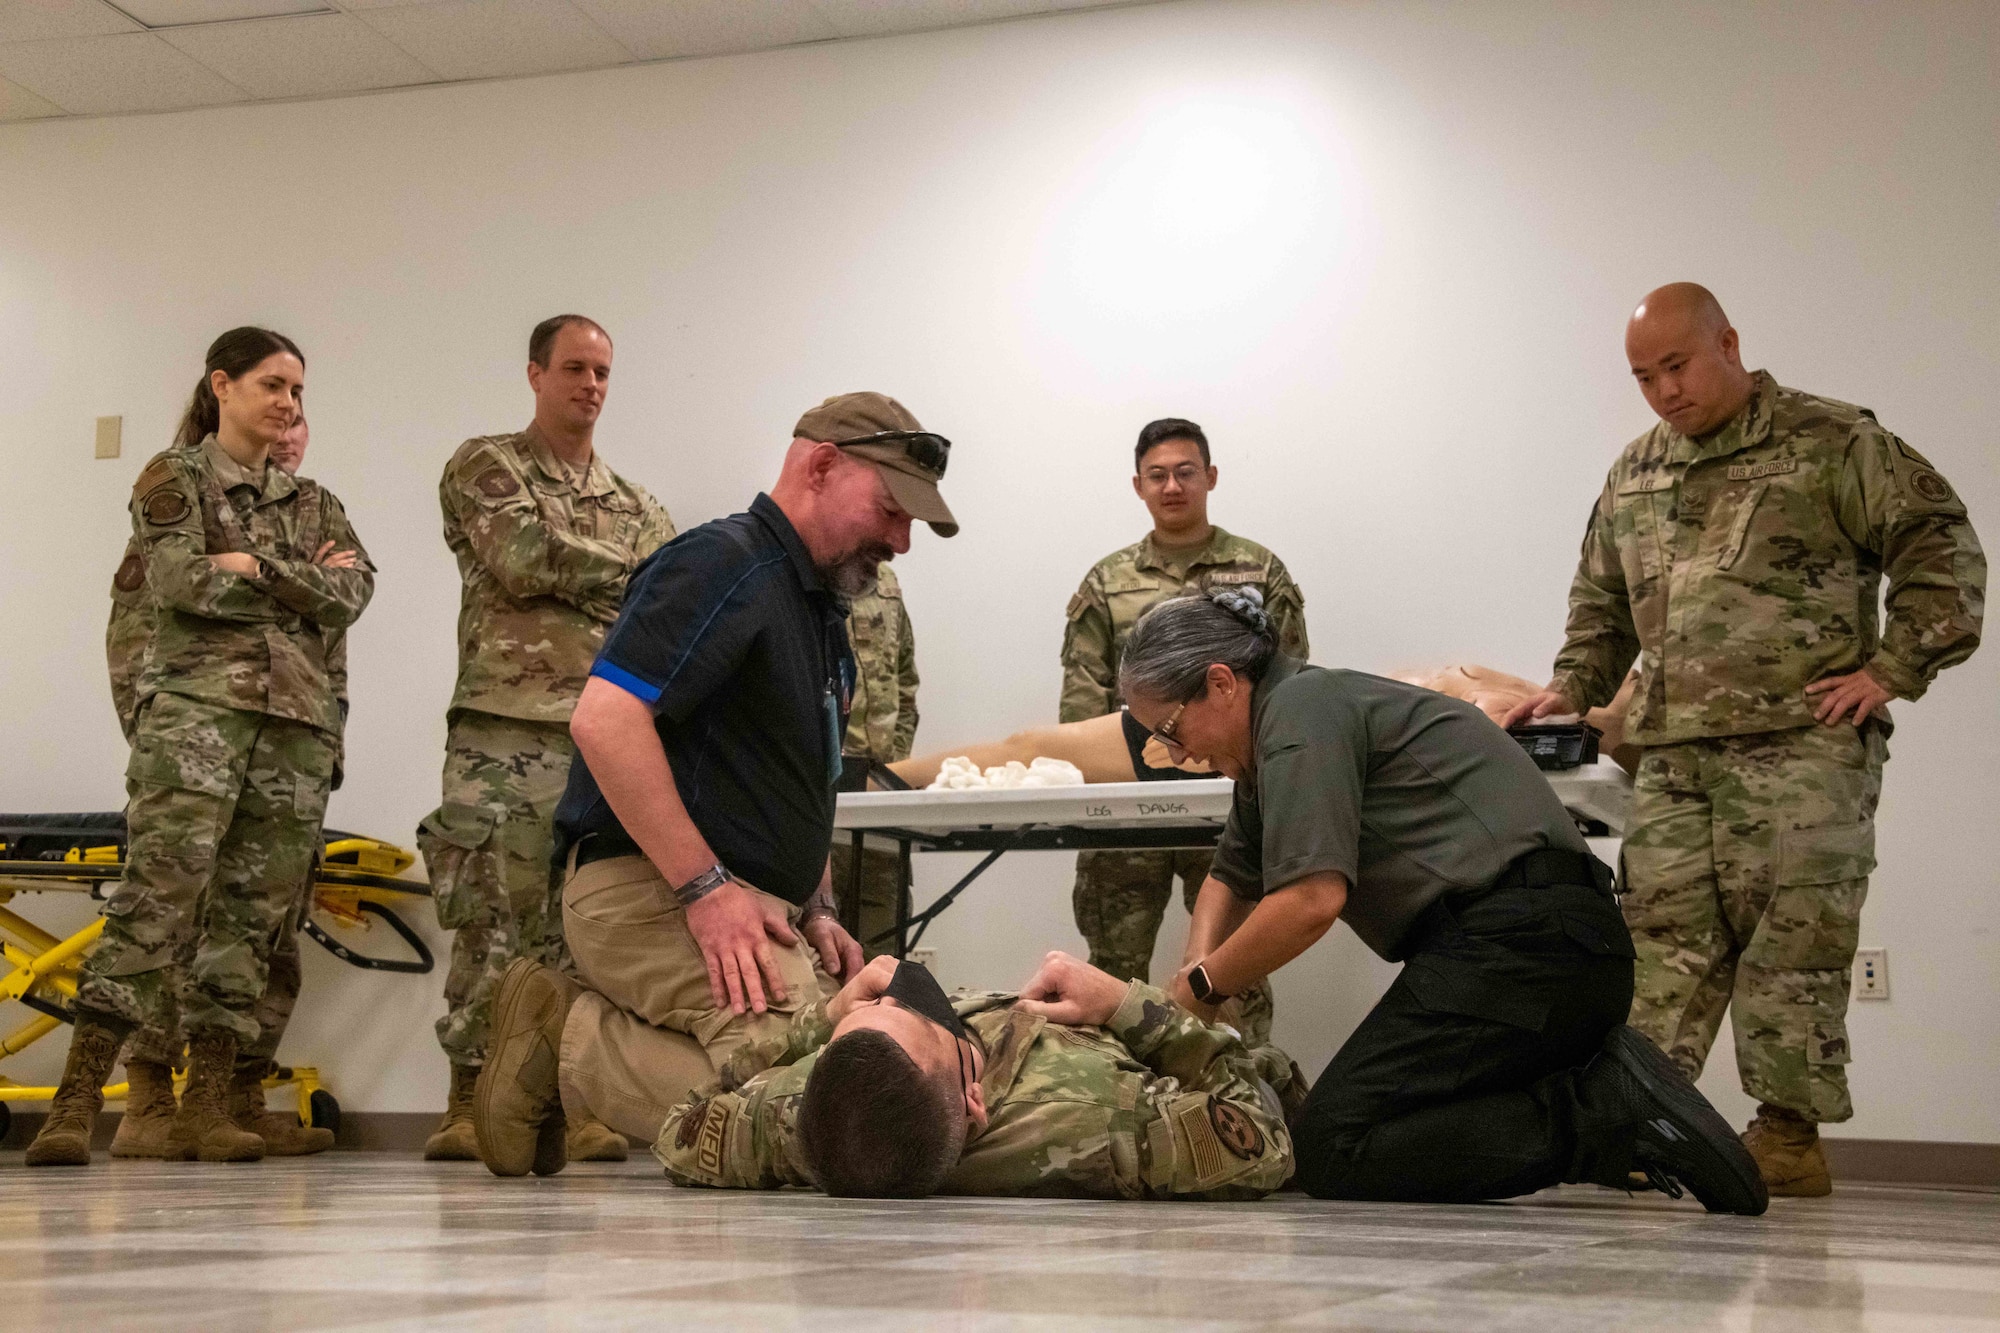 Ready Eagle cadre trains Field Response Team members on injuries they may encounter during an incident. The exercise enhanced communication and coordination between the response teams and installation first responders.